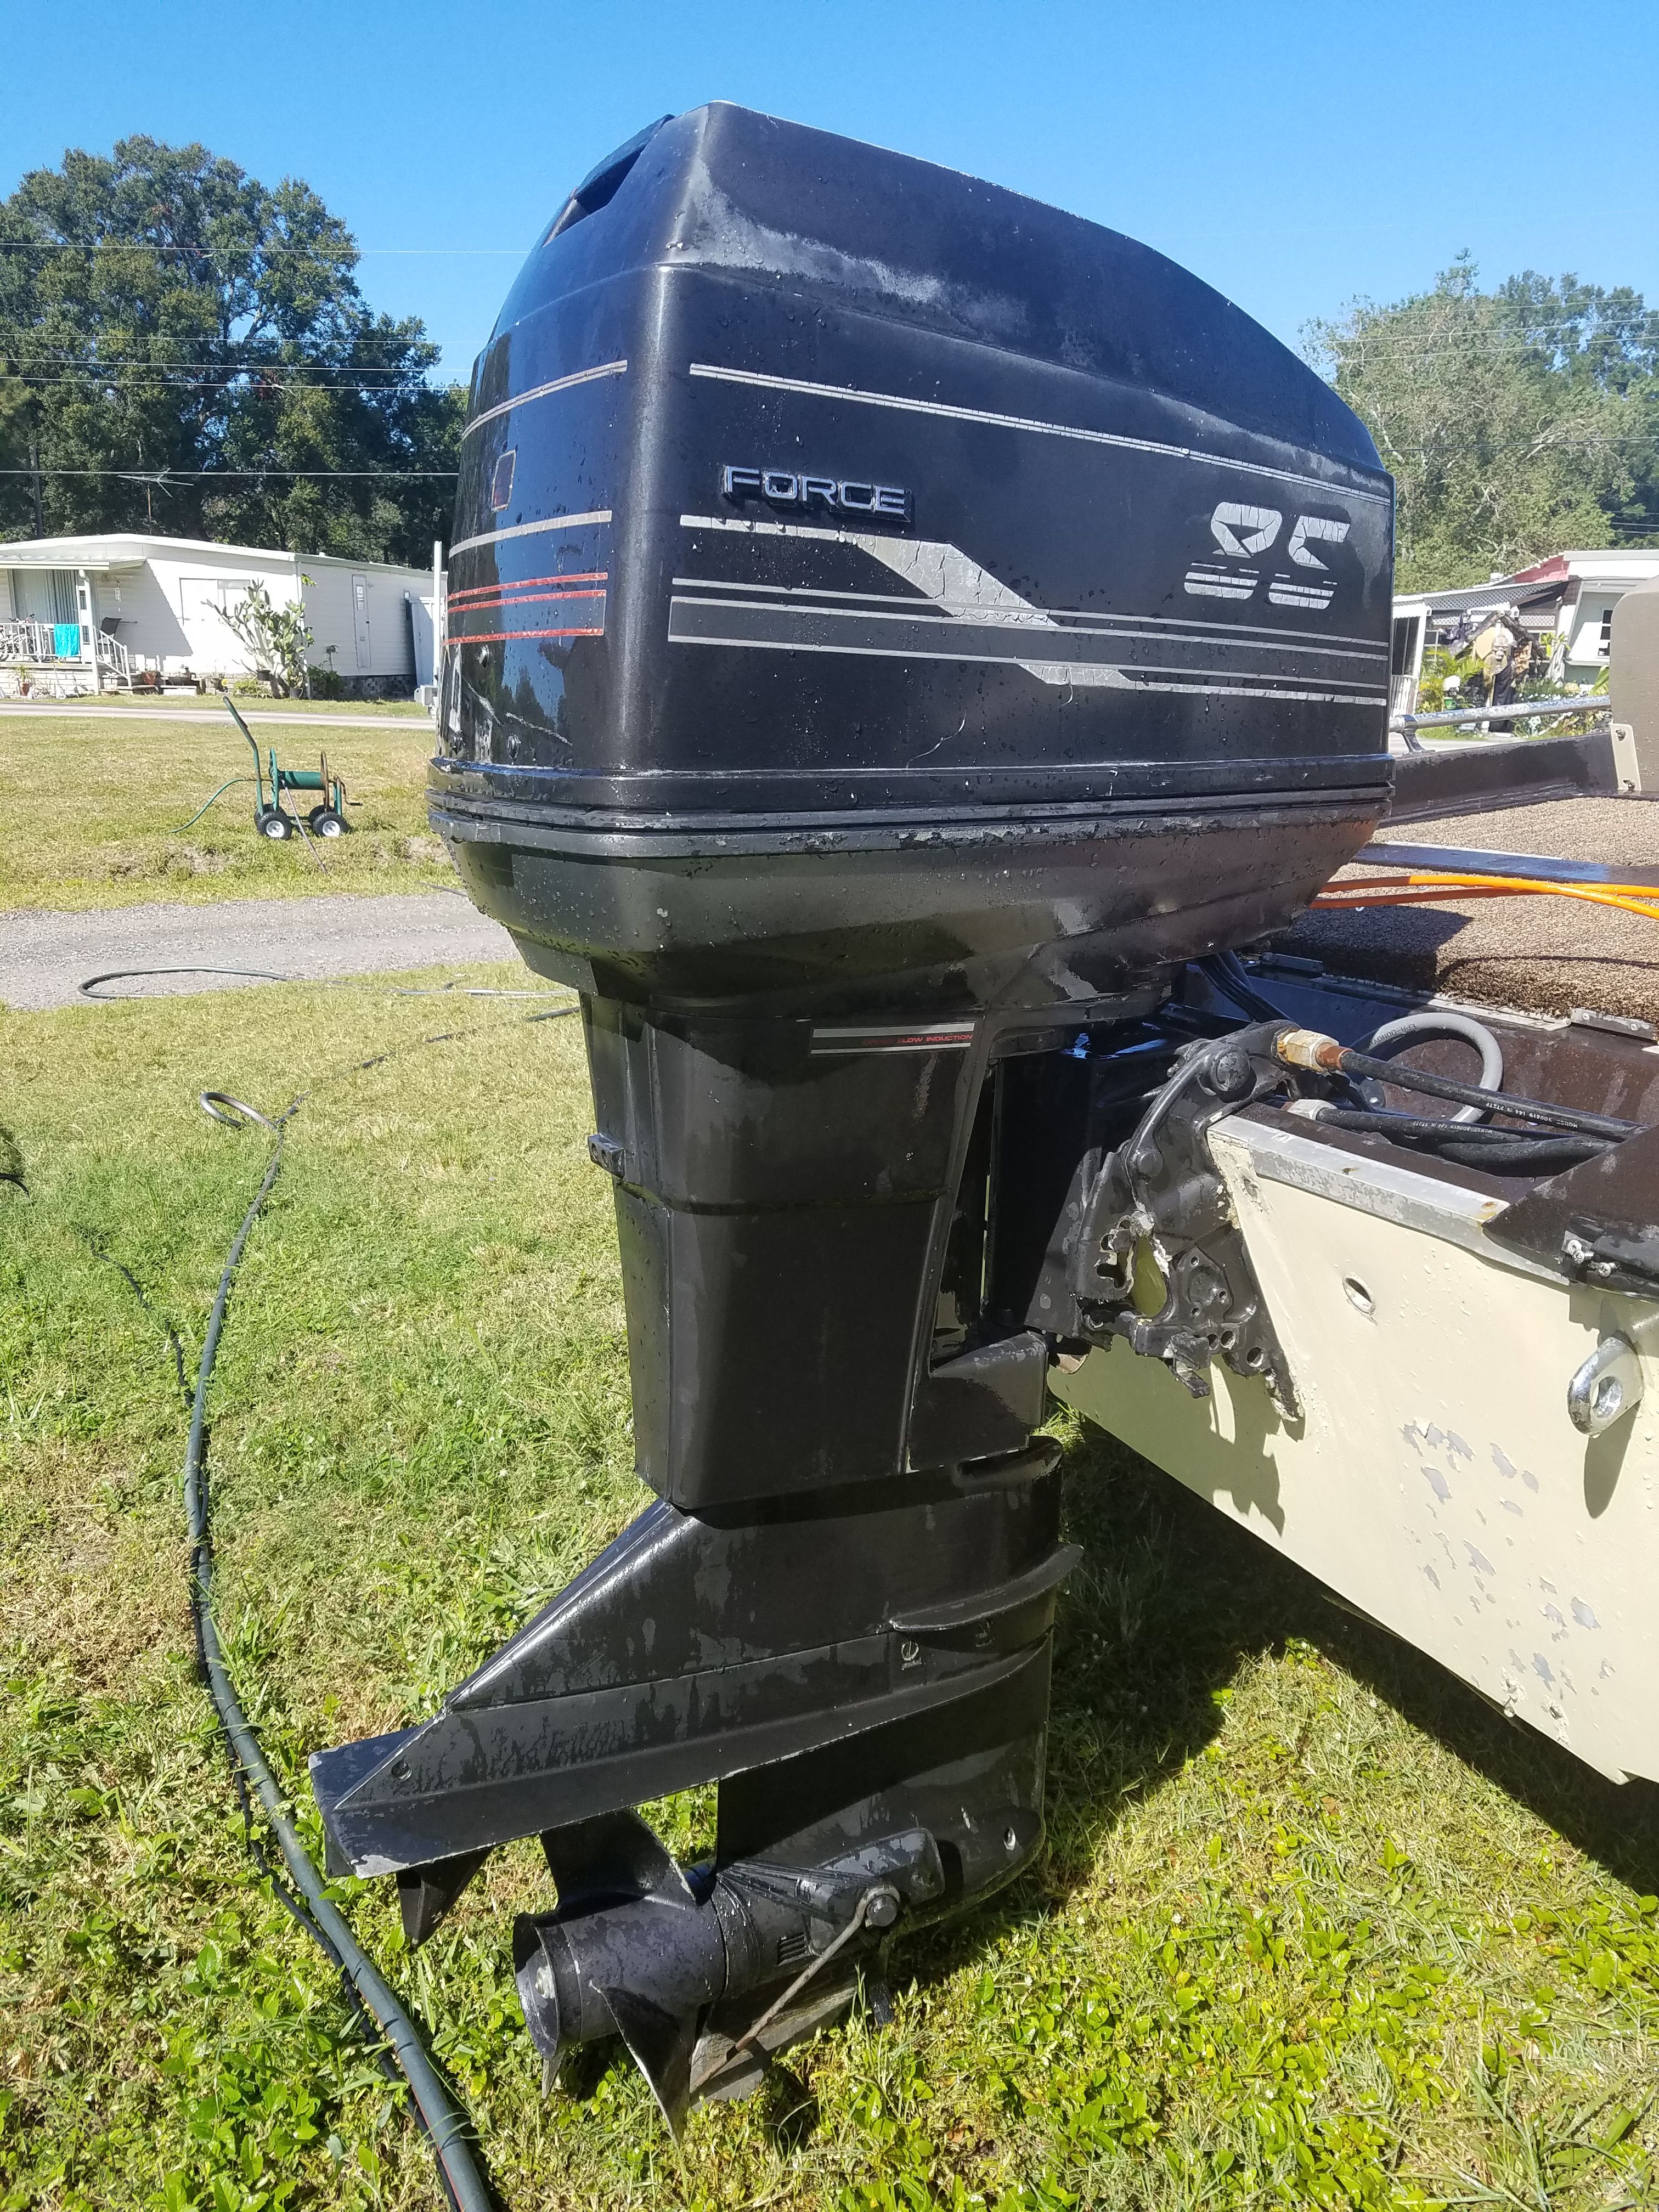 Who Makes Force Outboard Motors  